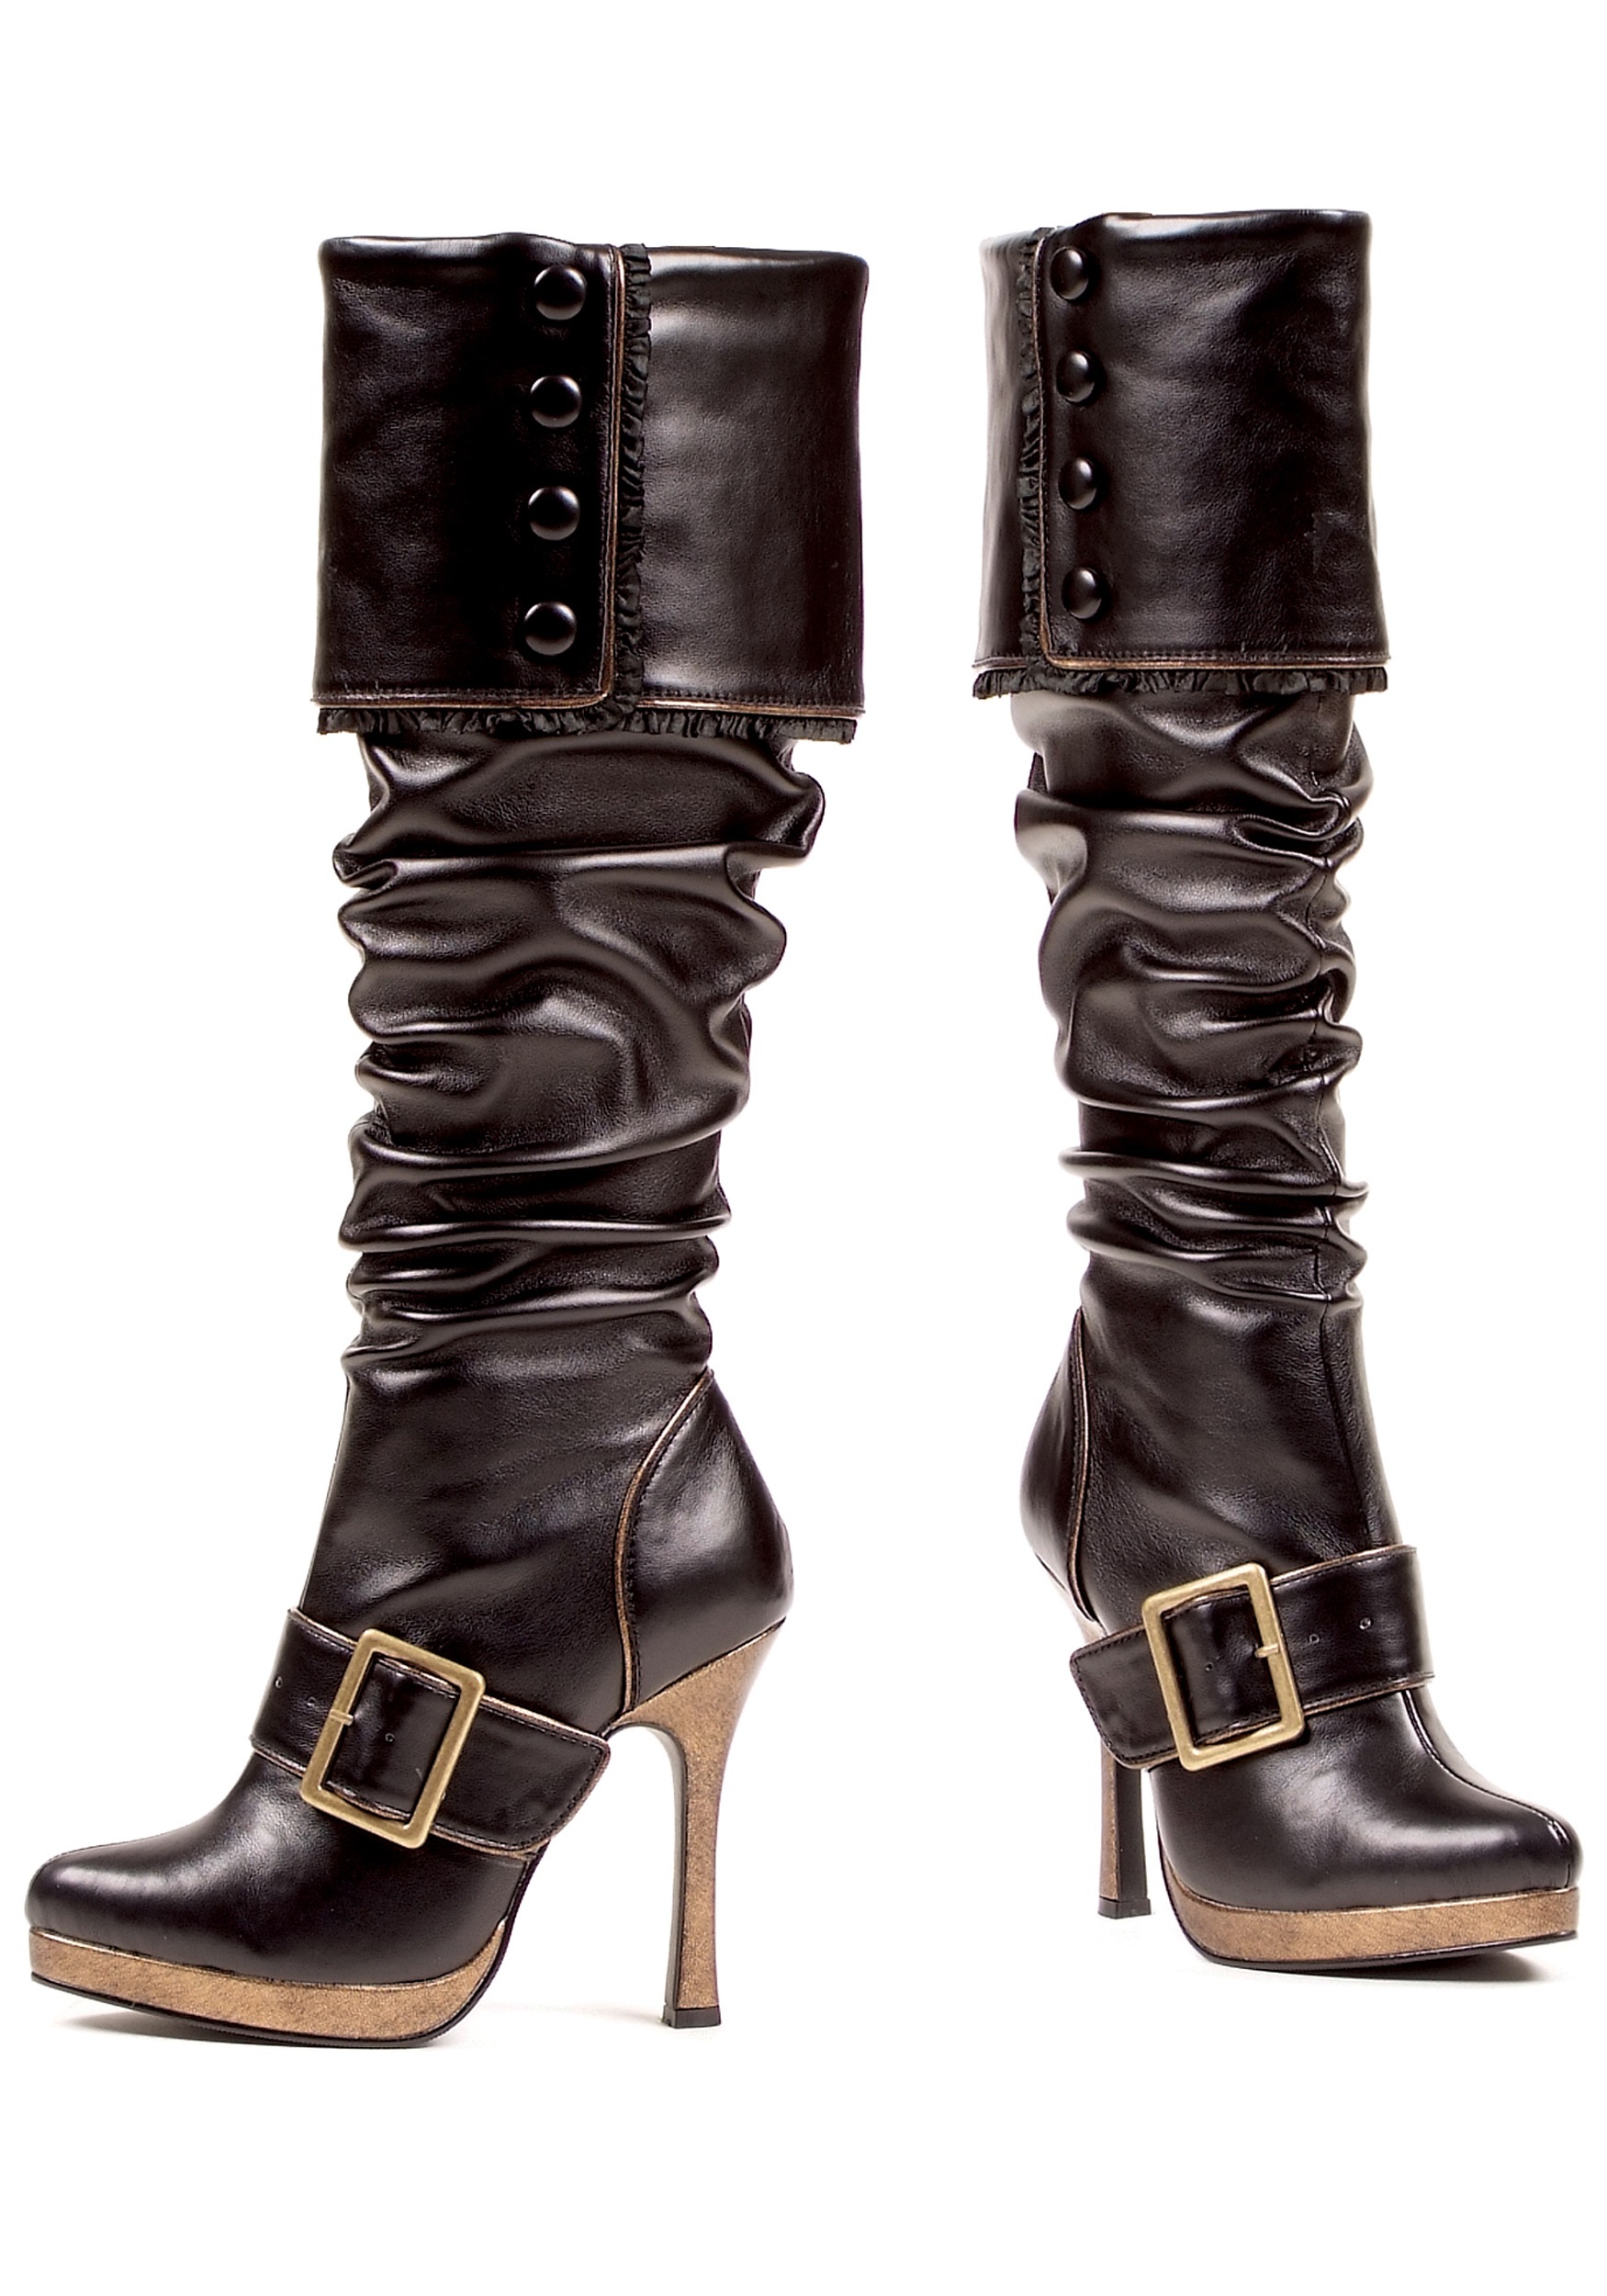 Women's Sexy Buckle Pirate Boots